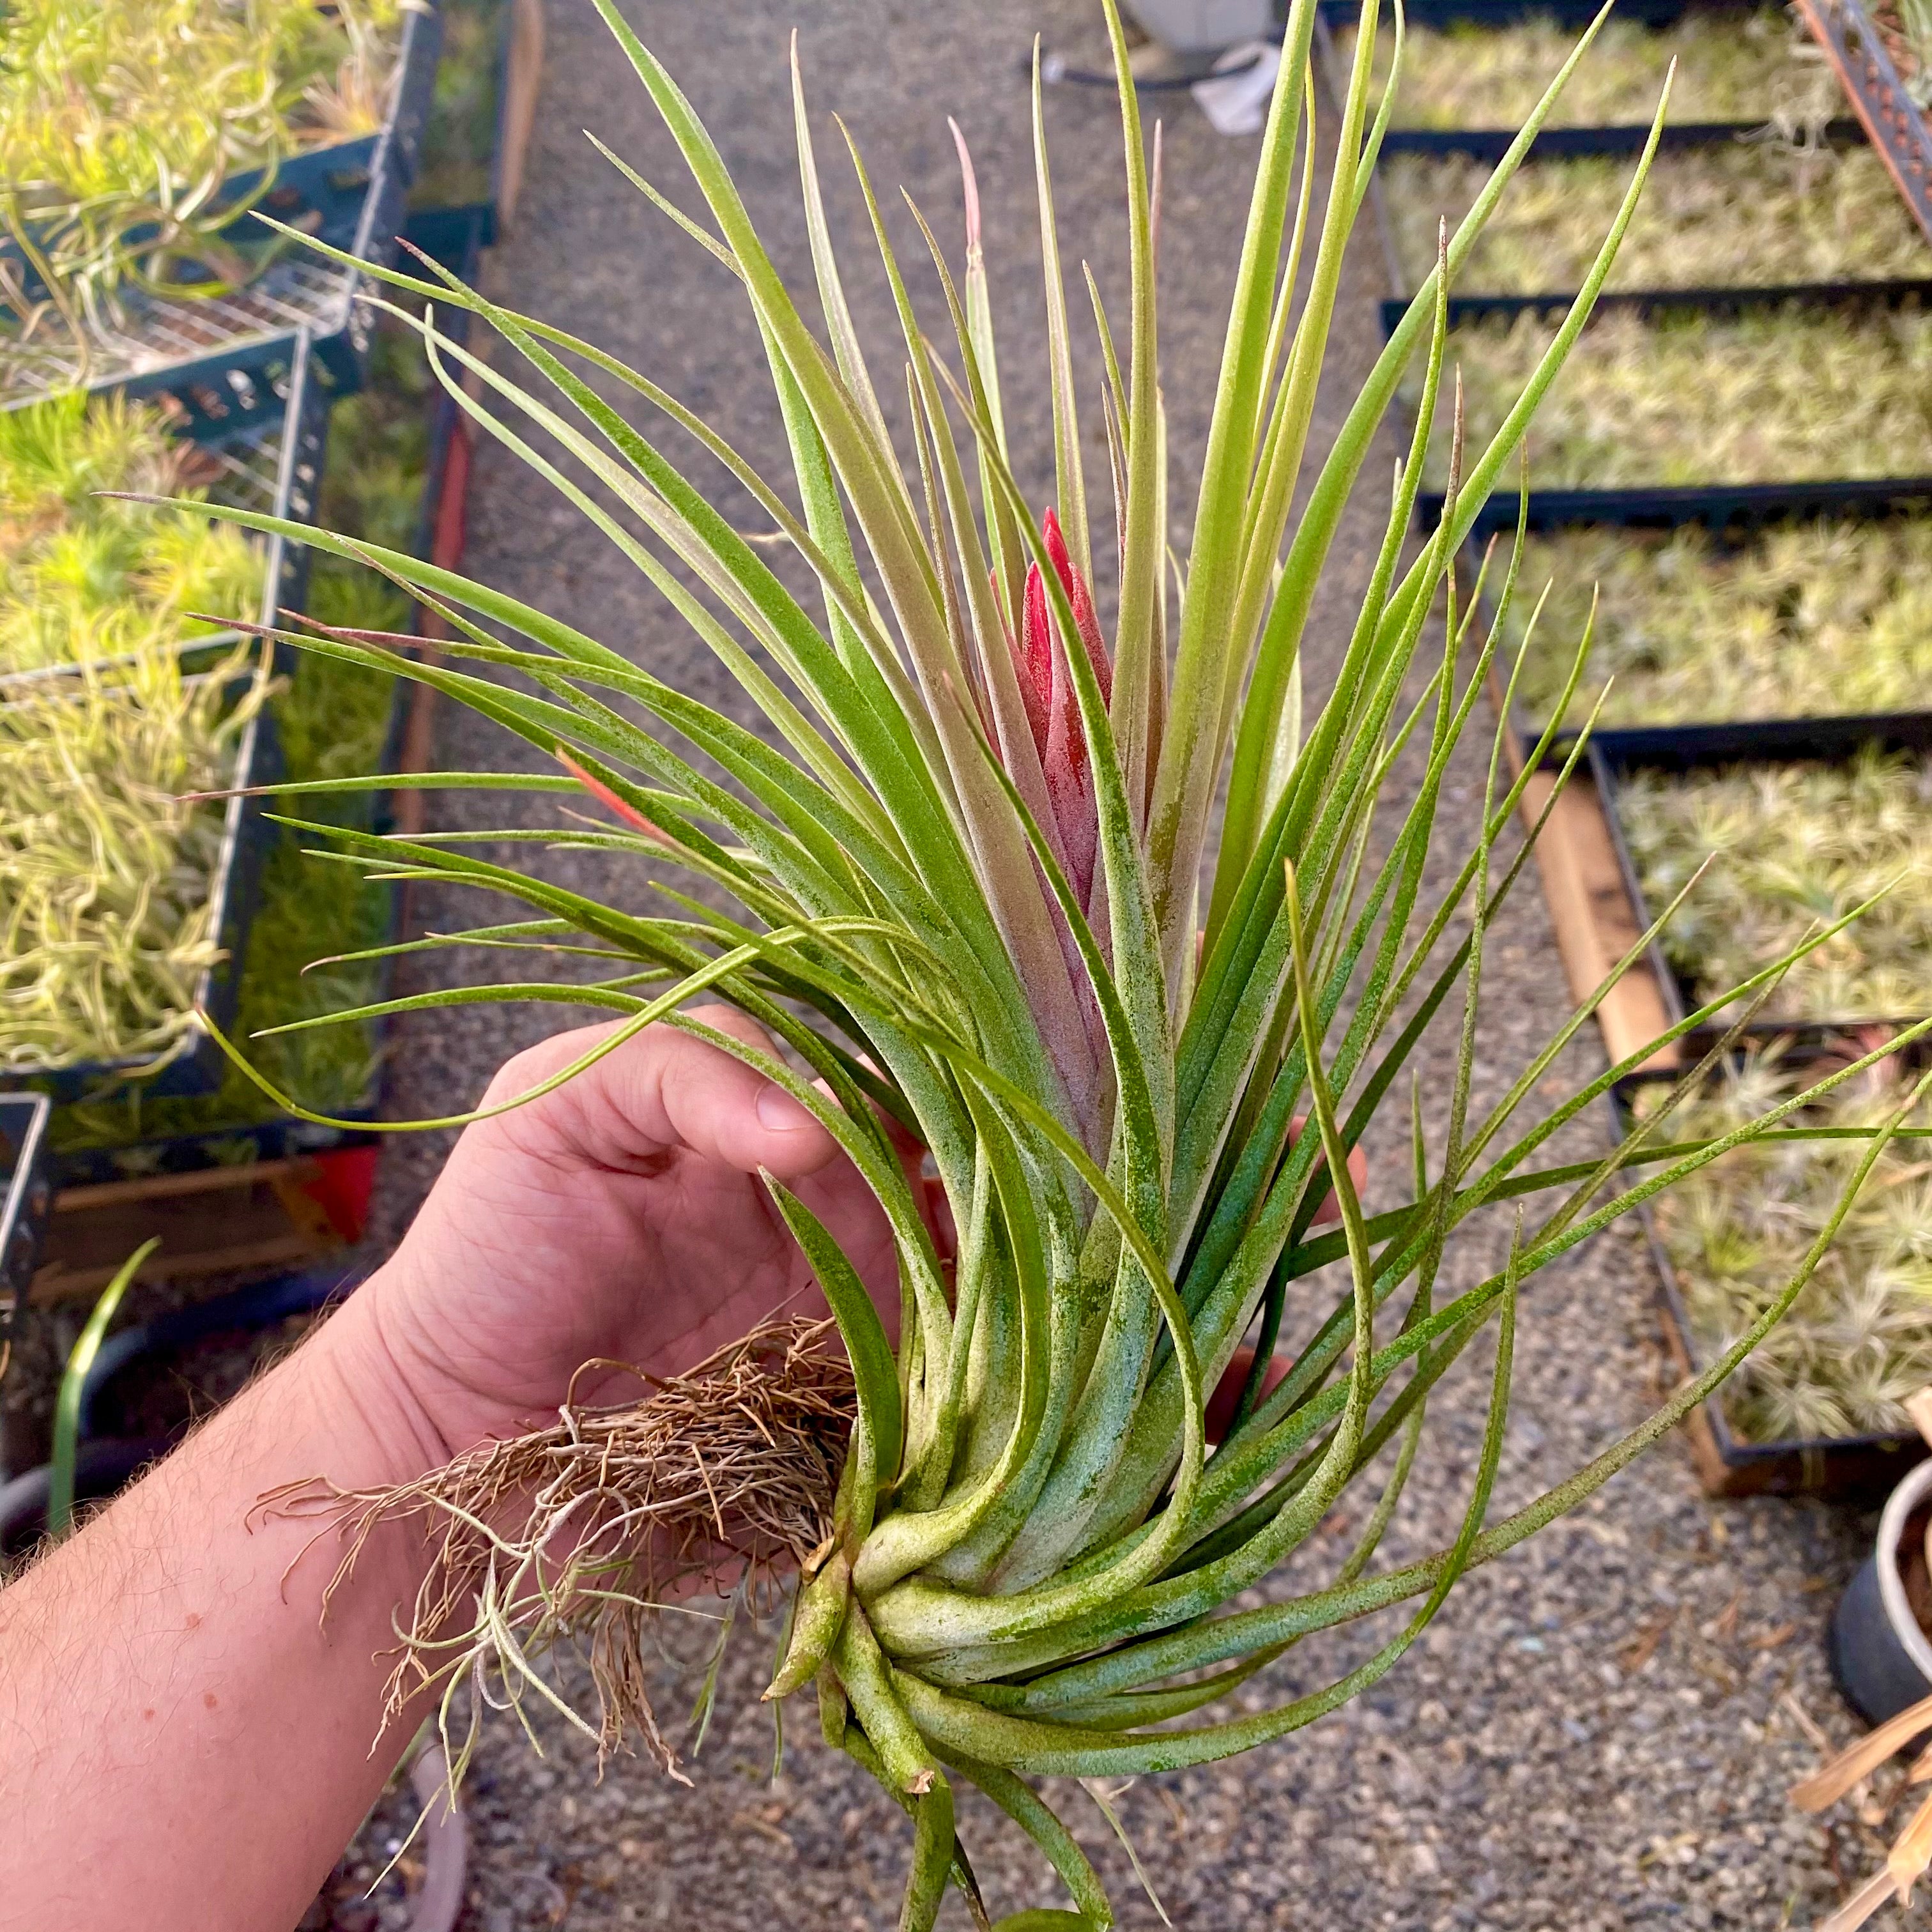 Large Exserta x Velutina <br> (Not in bloom but same size as pictured here)